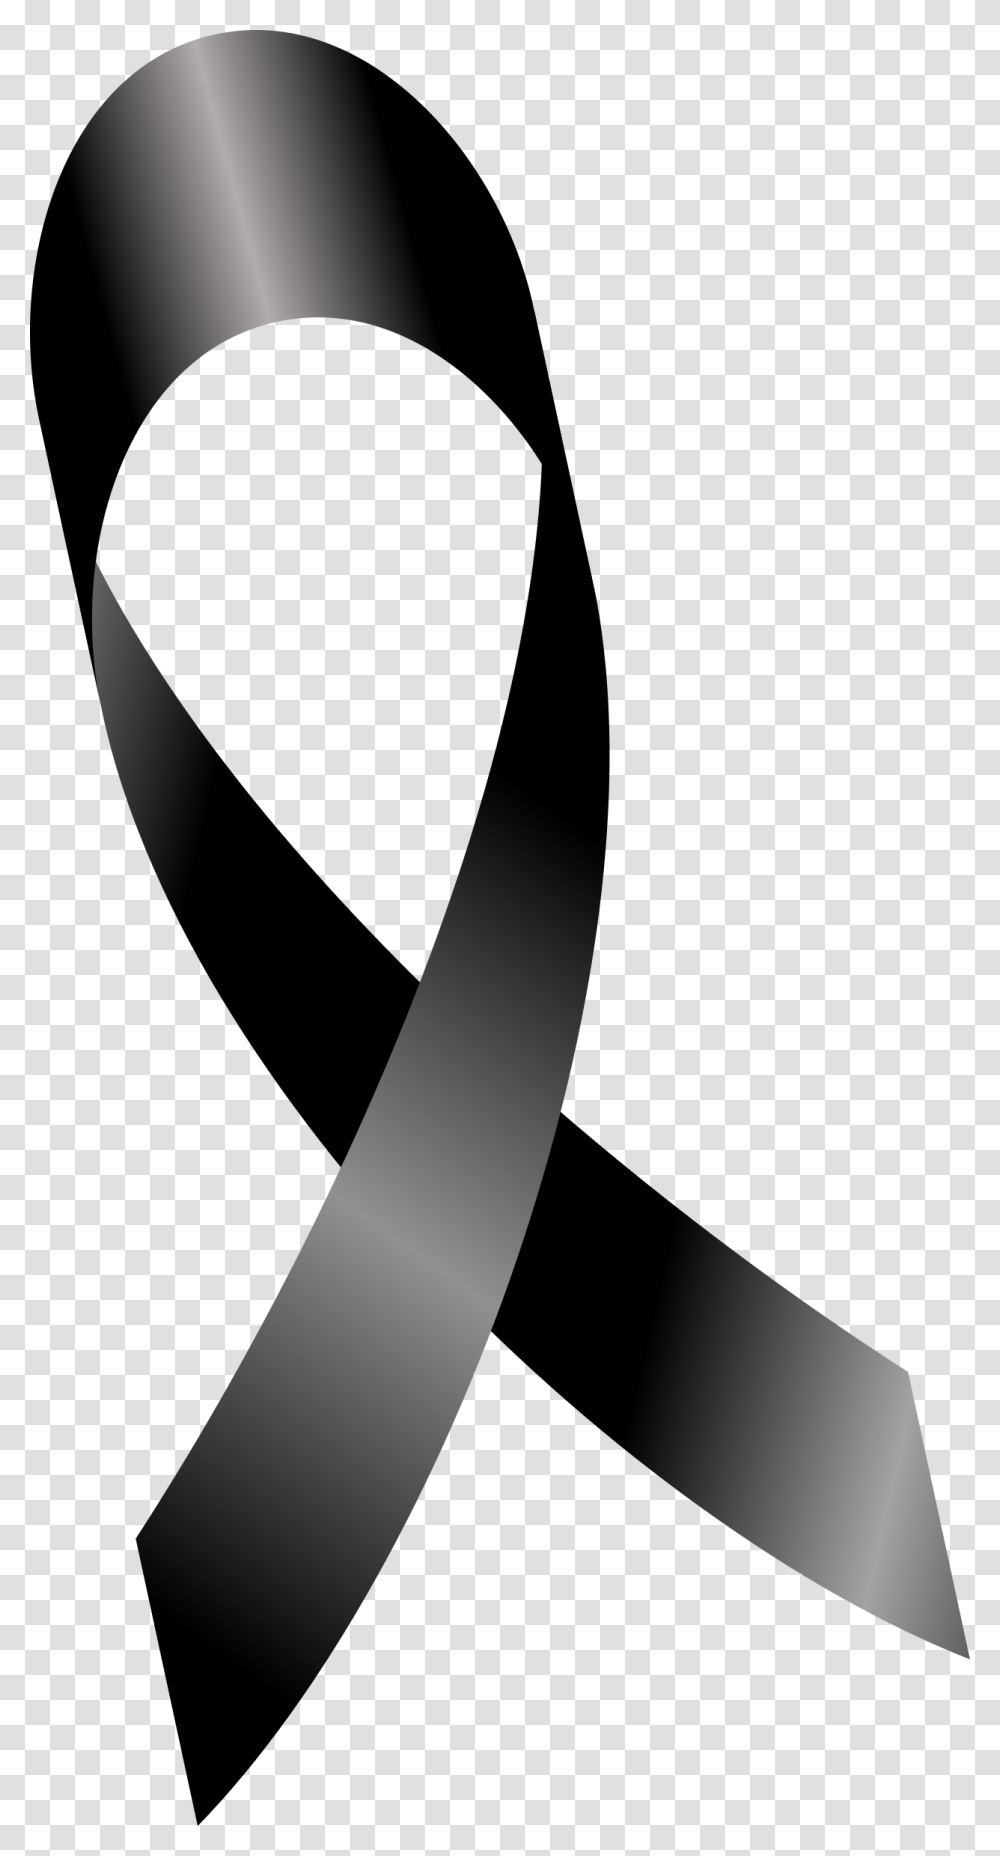 Melanoma Cancer Ribbon Mourning Ribbon Luto Cancer Ribbon Black, Accessories, Accessory Transparent Png